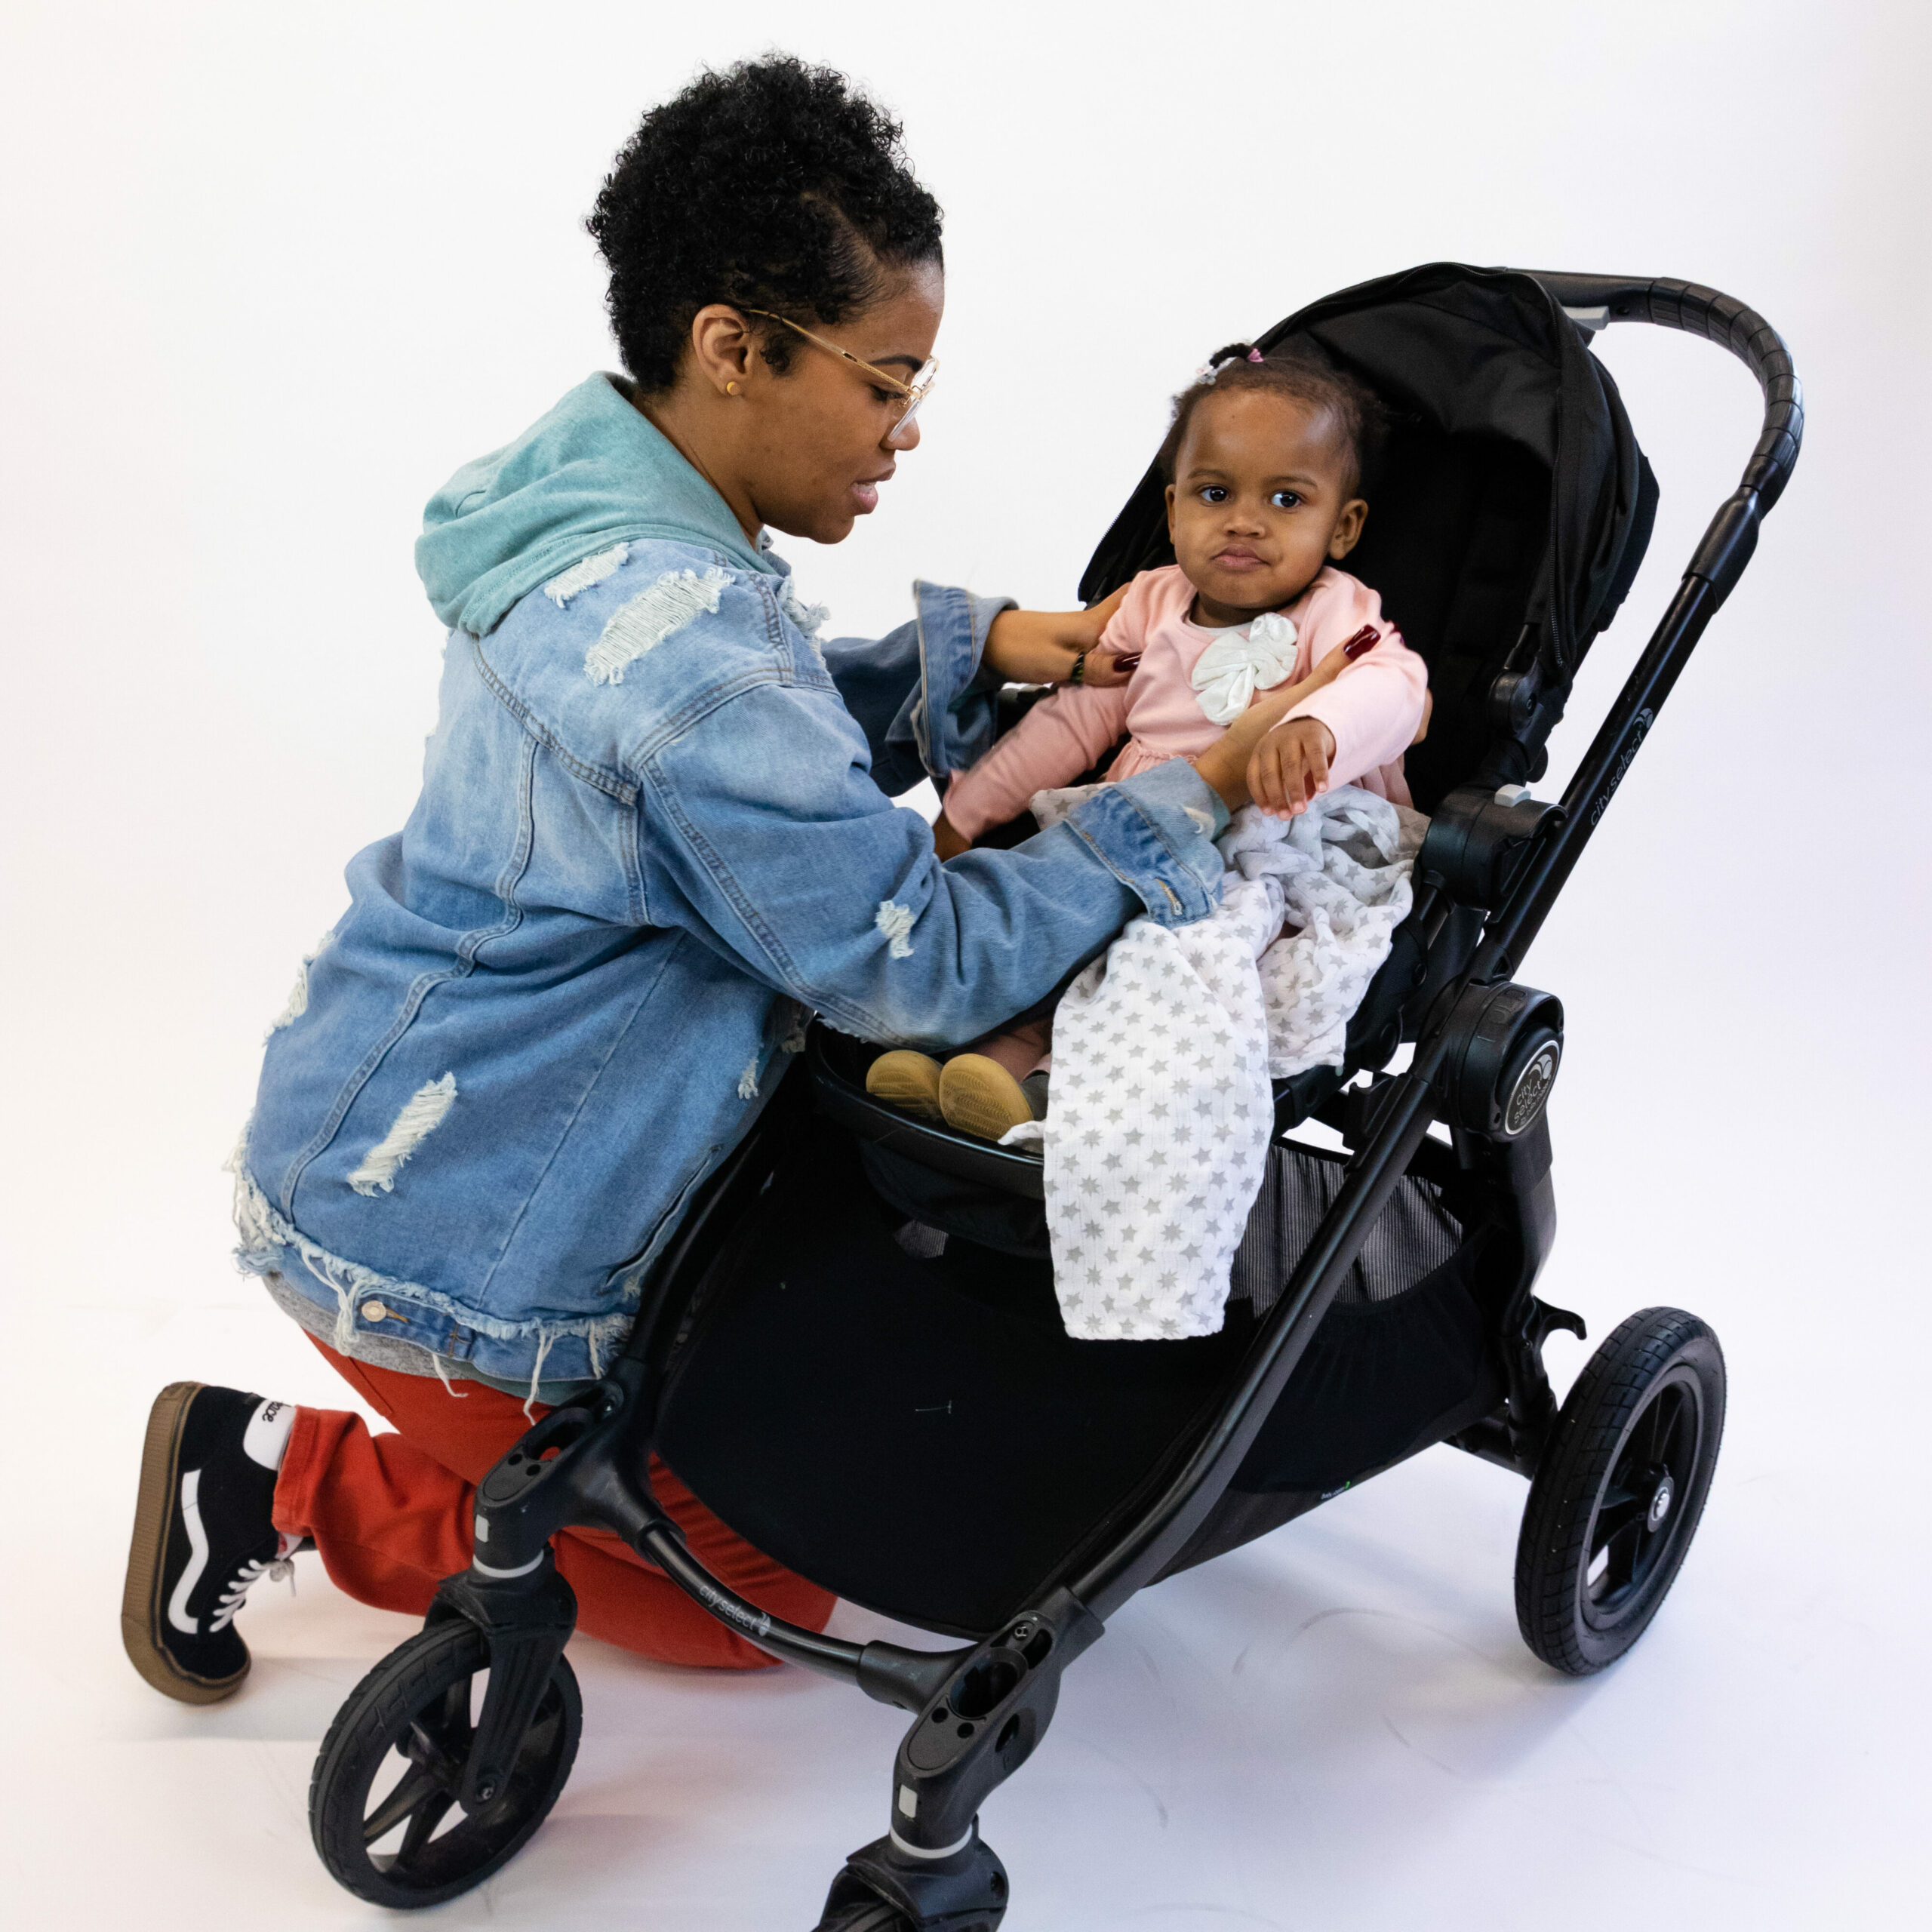 Mother setting her child in a full size stroller from kid to kid